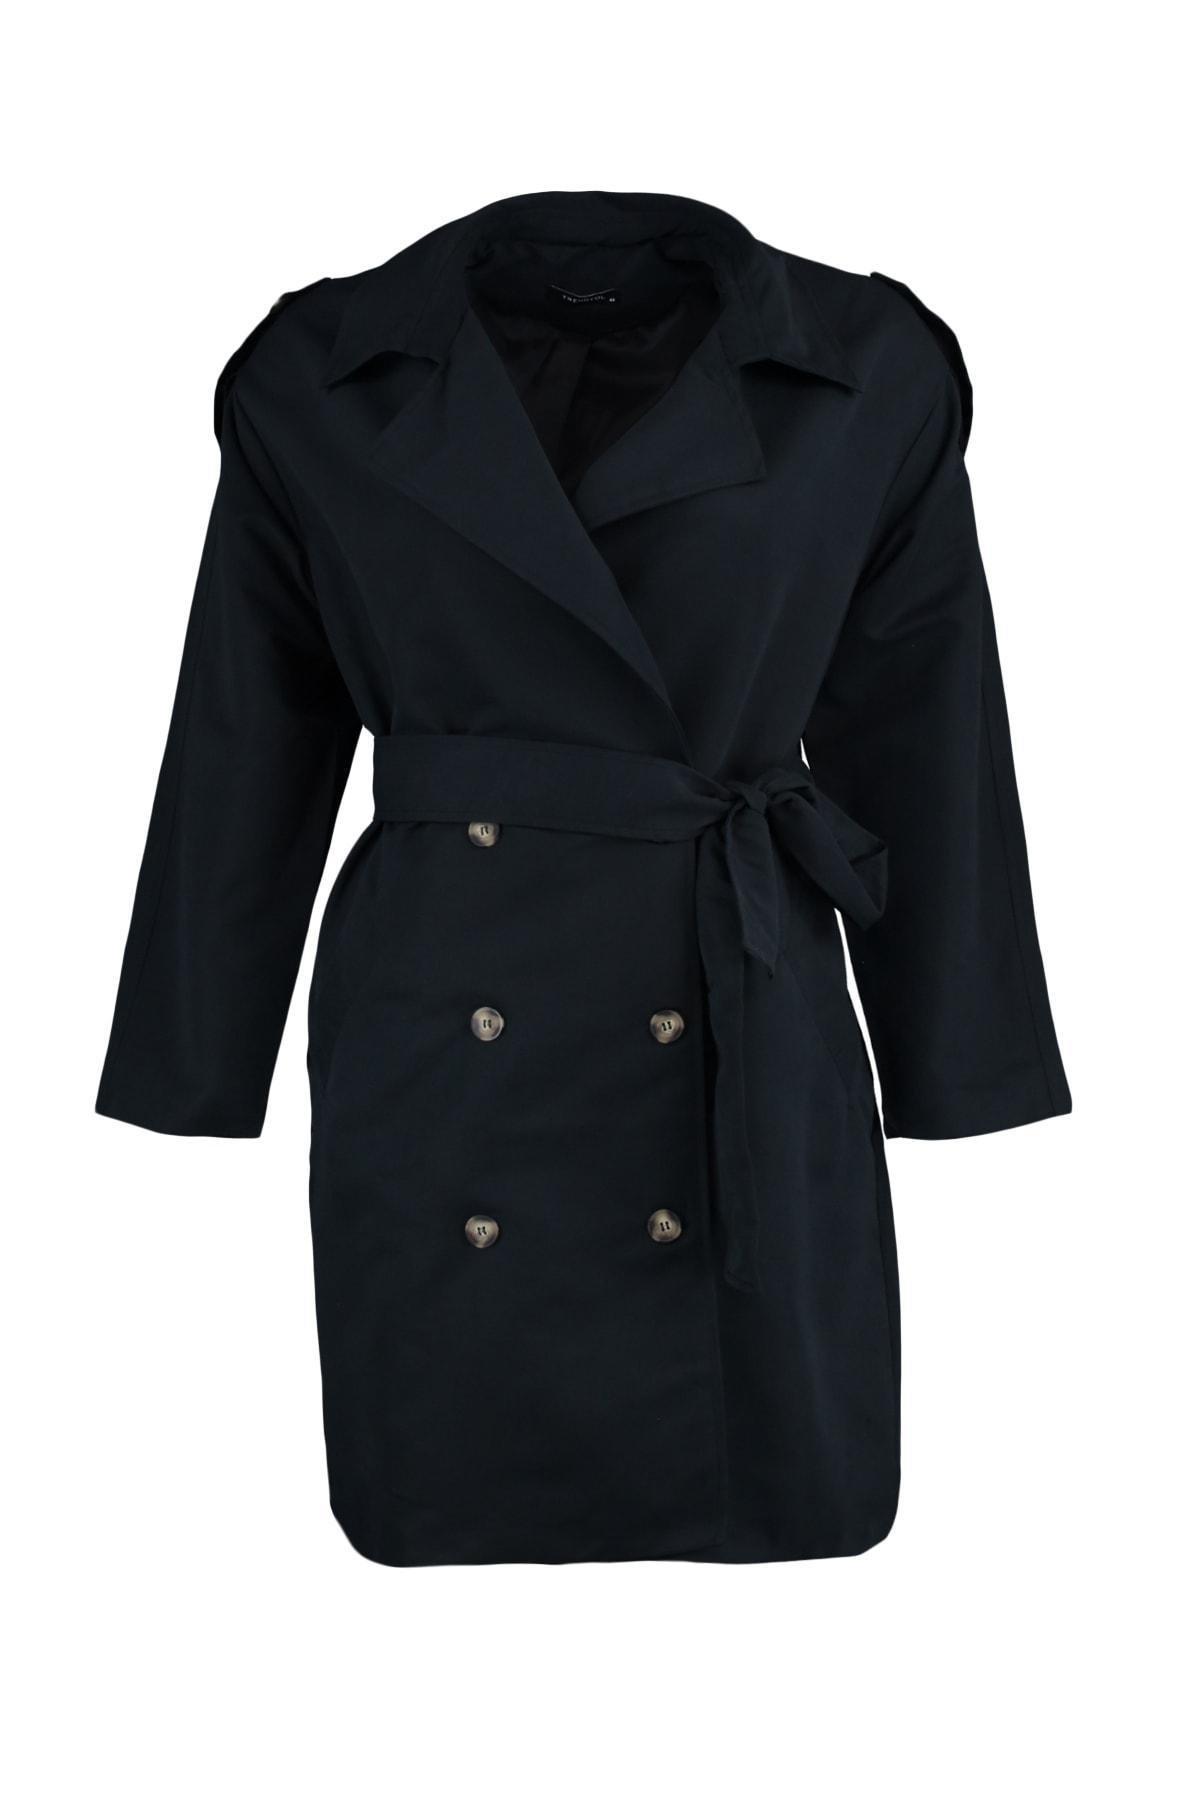 Trendyol - Black Double Breasted Plus Size Trench Coat